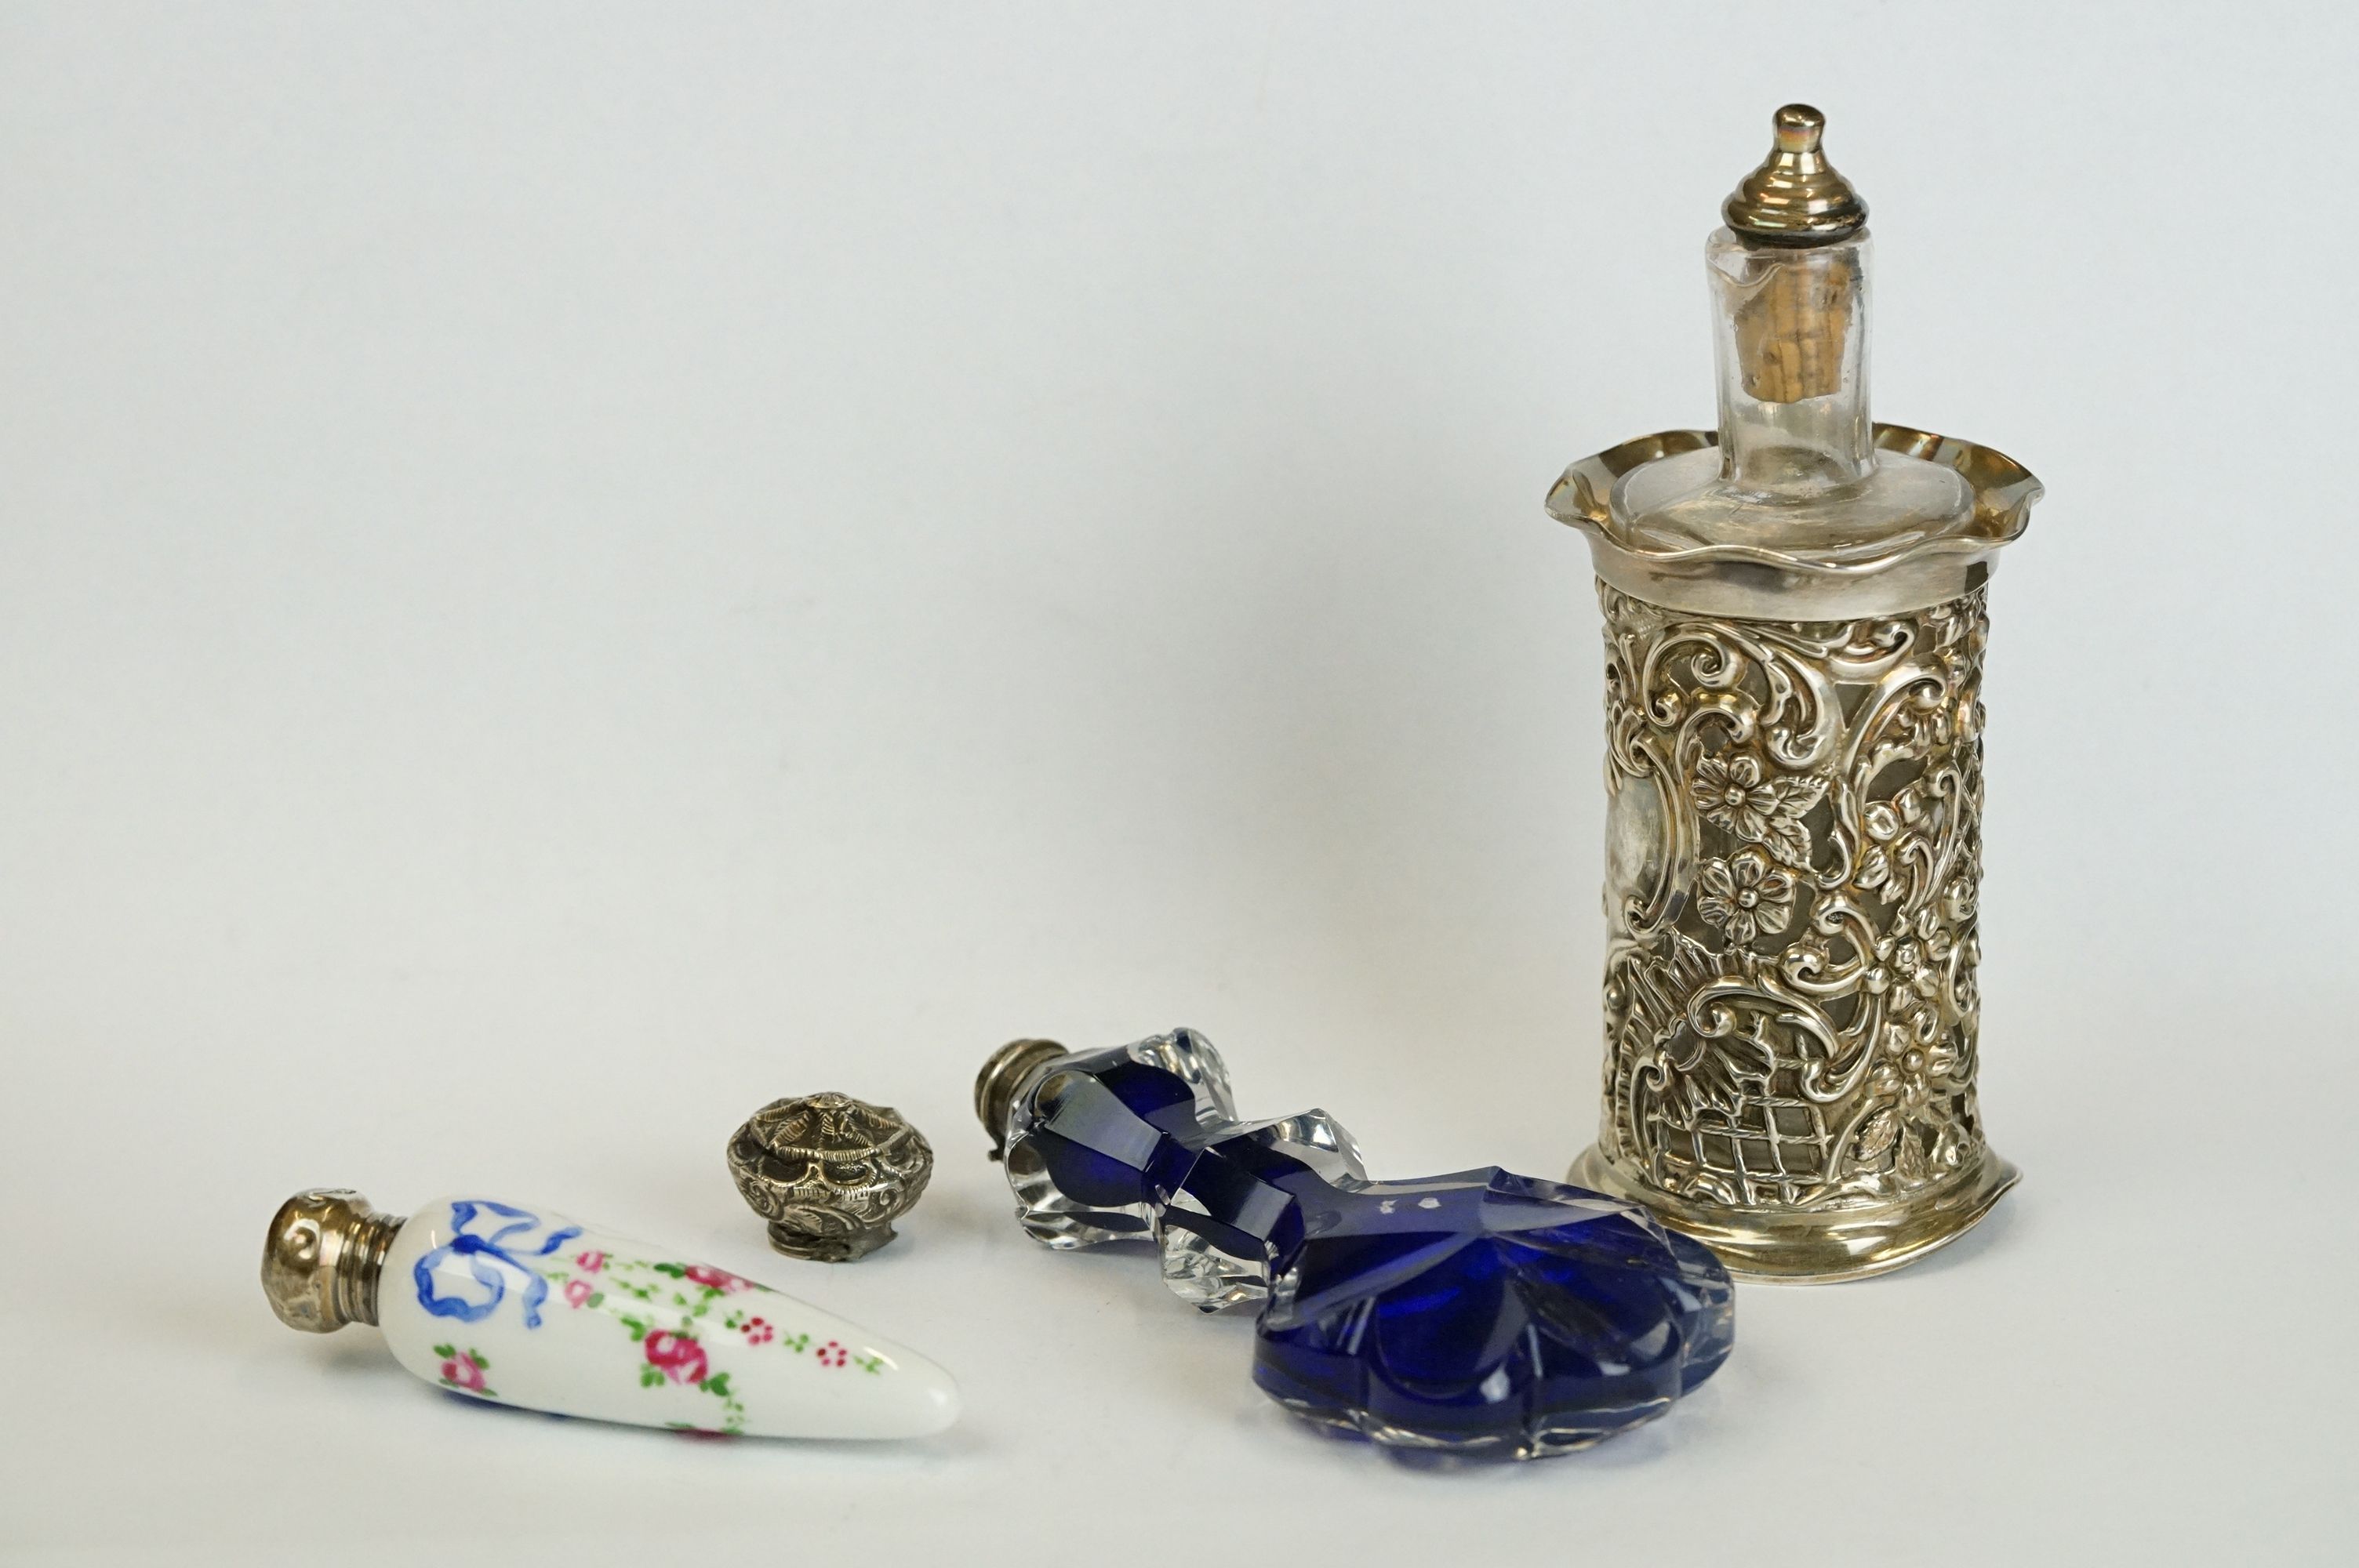 A fully hallmarked sterling silver pierced cased scent bottle together with a blue glass and a